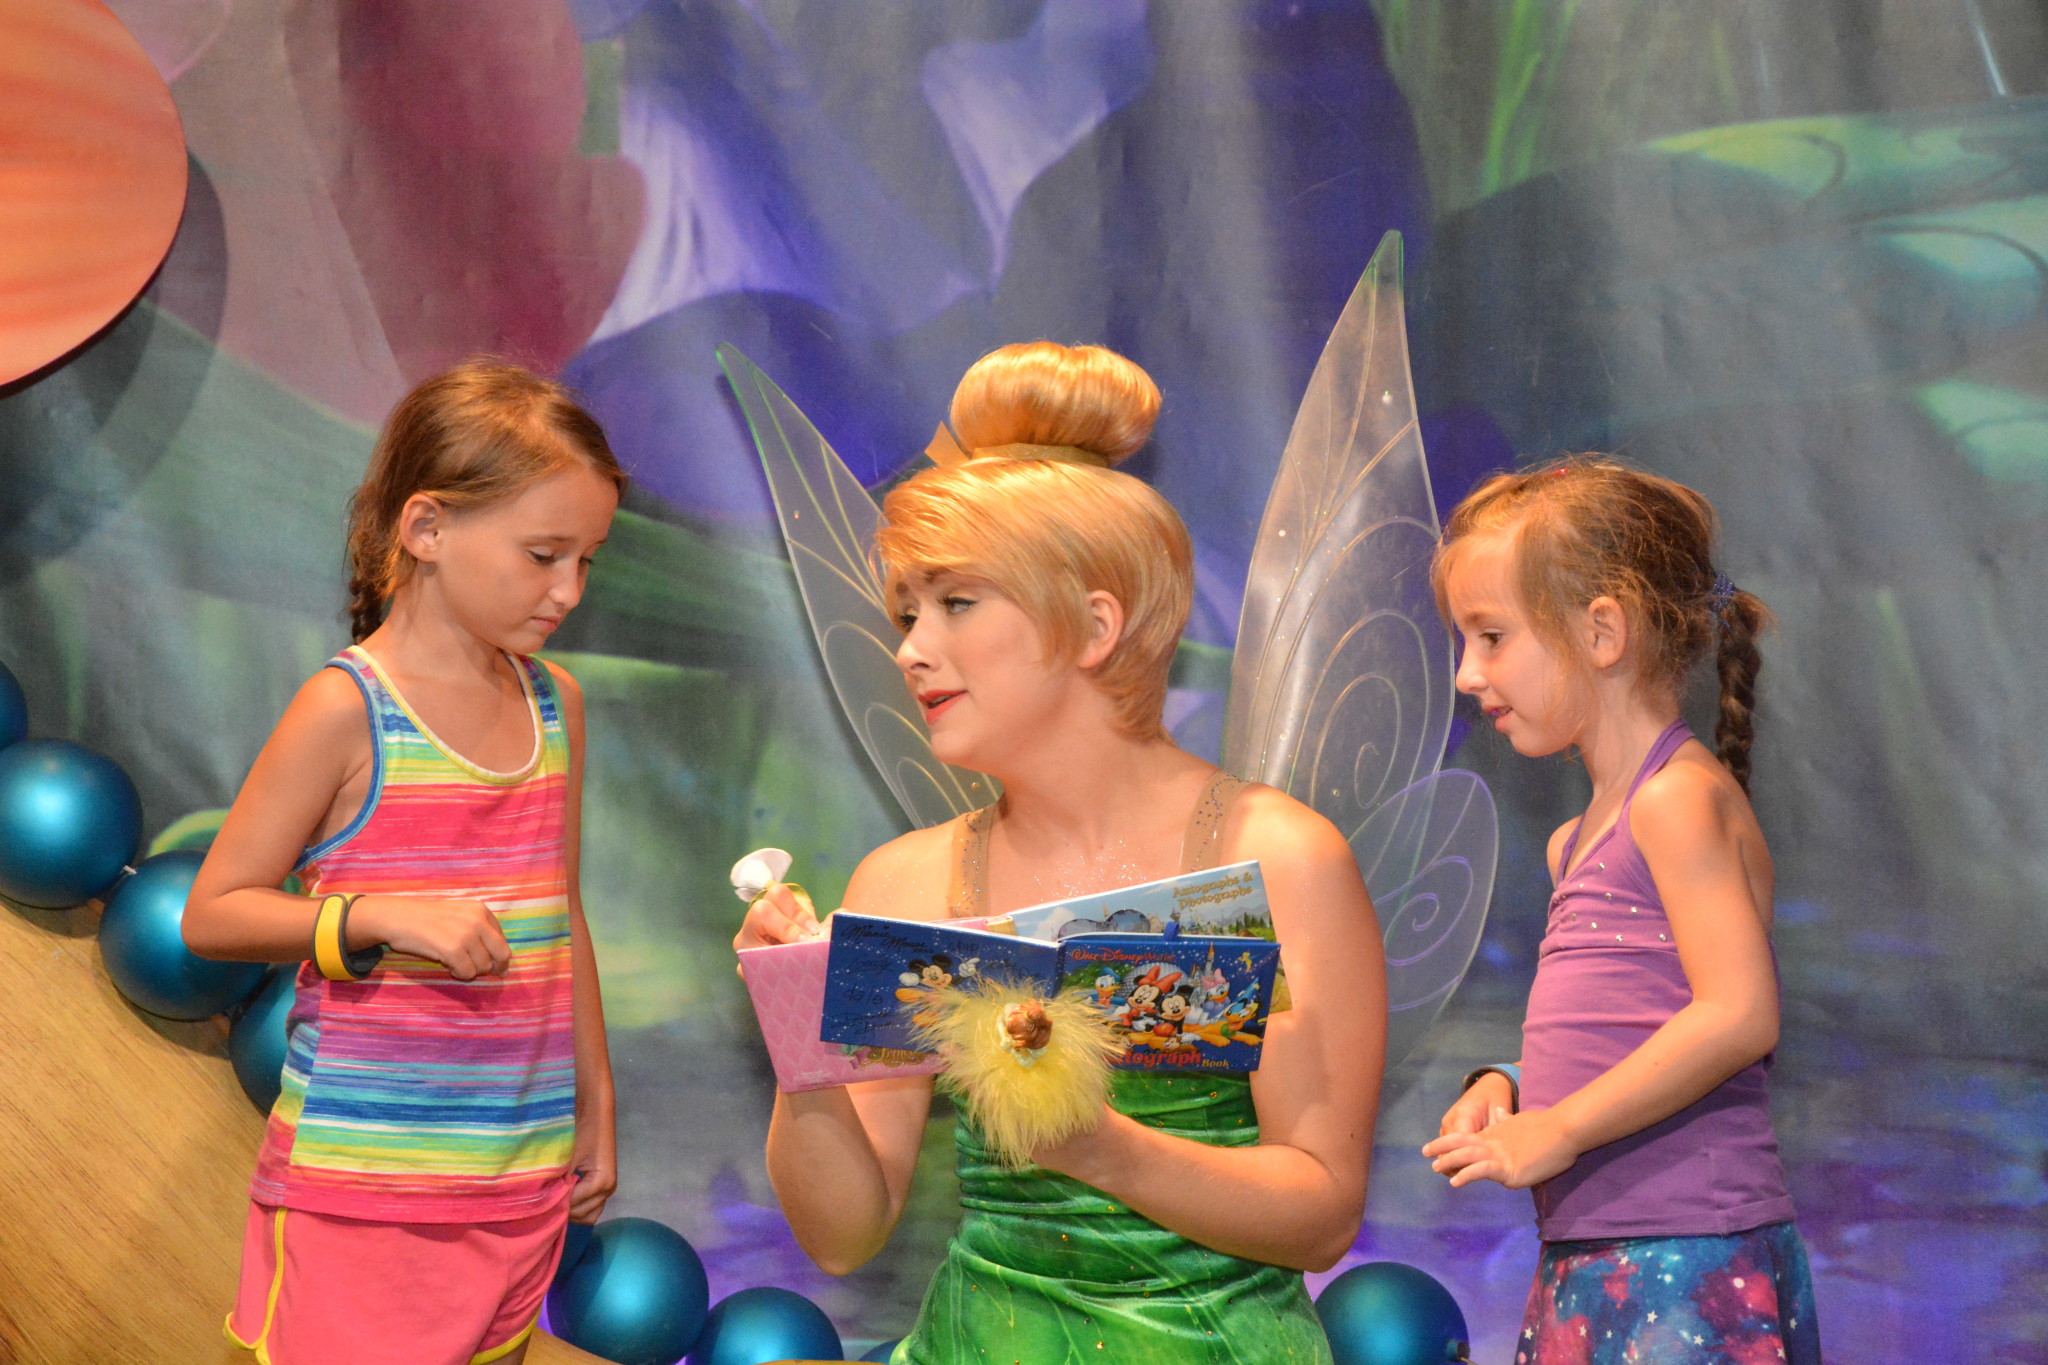 The girls and Tinker Bell